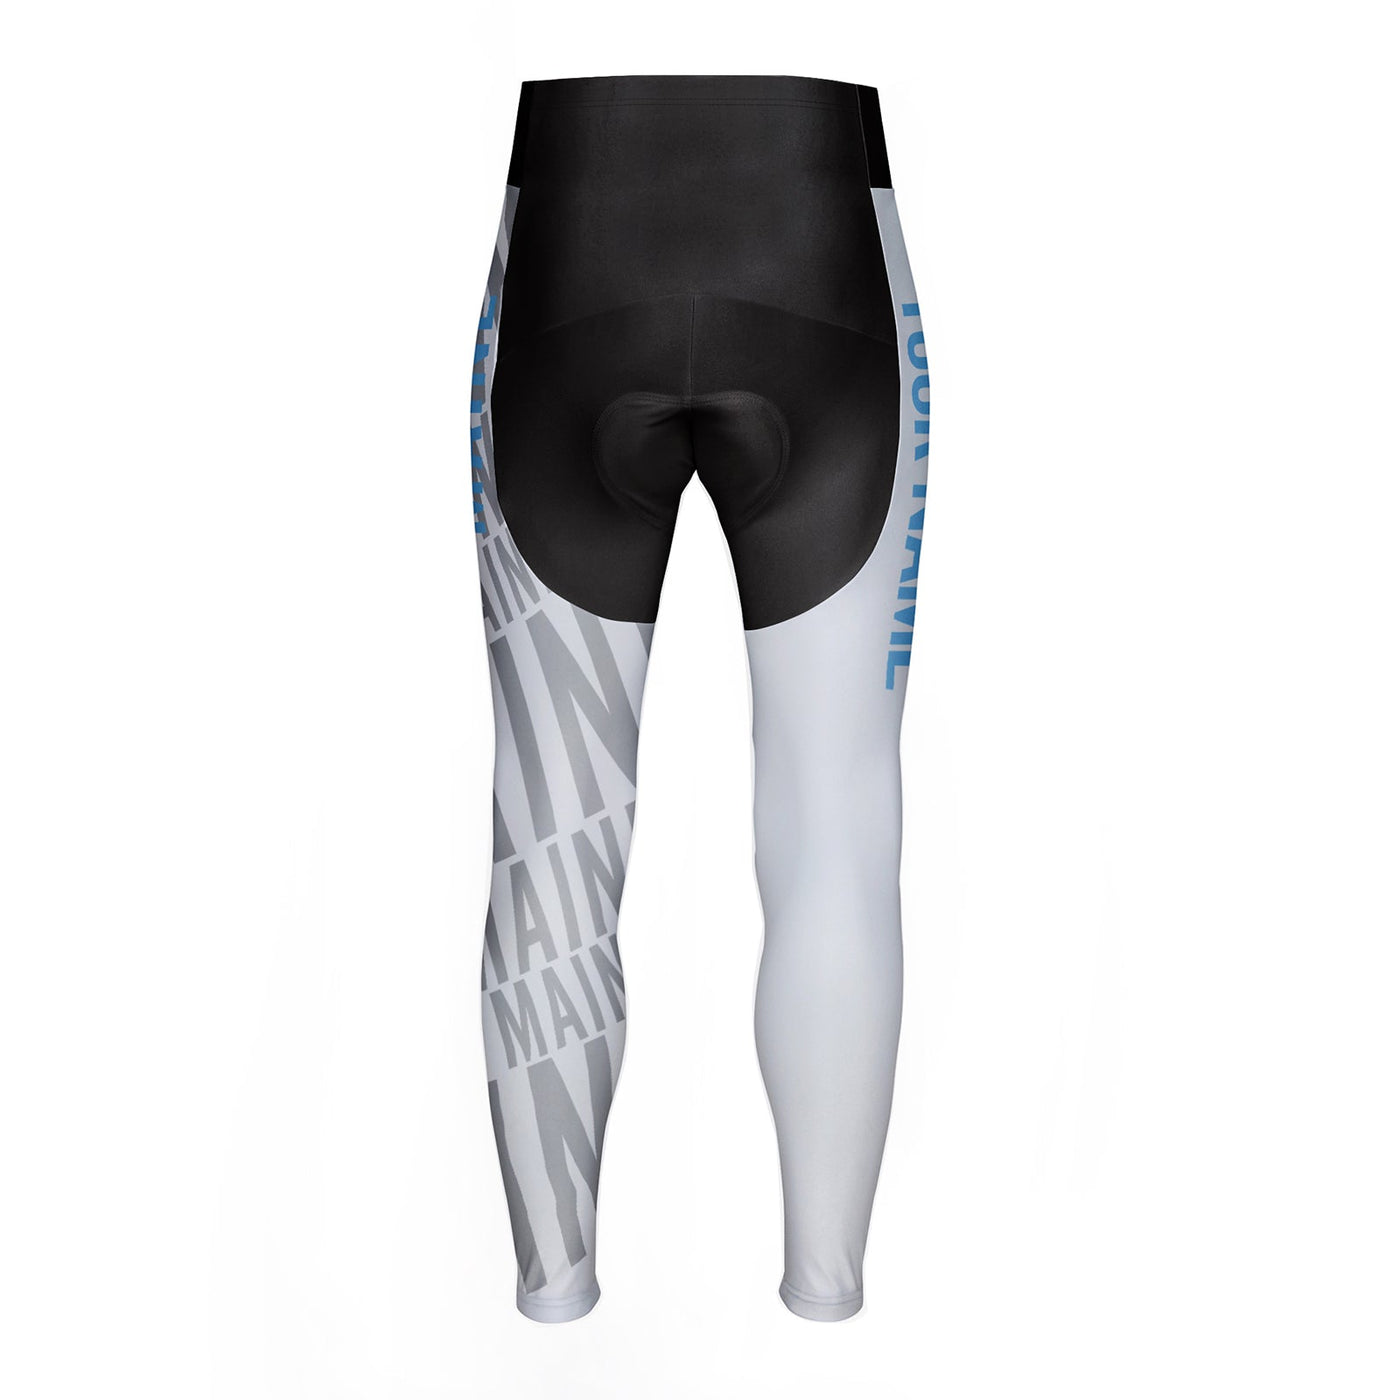 Customized Maine Unisex Thermal Fleece Cycling Tights Long Pants